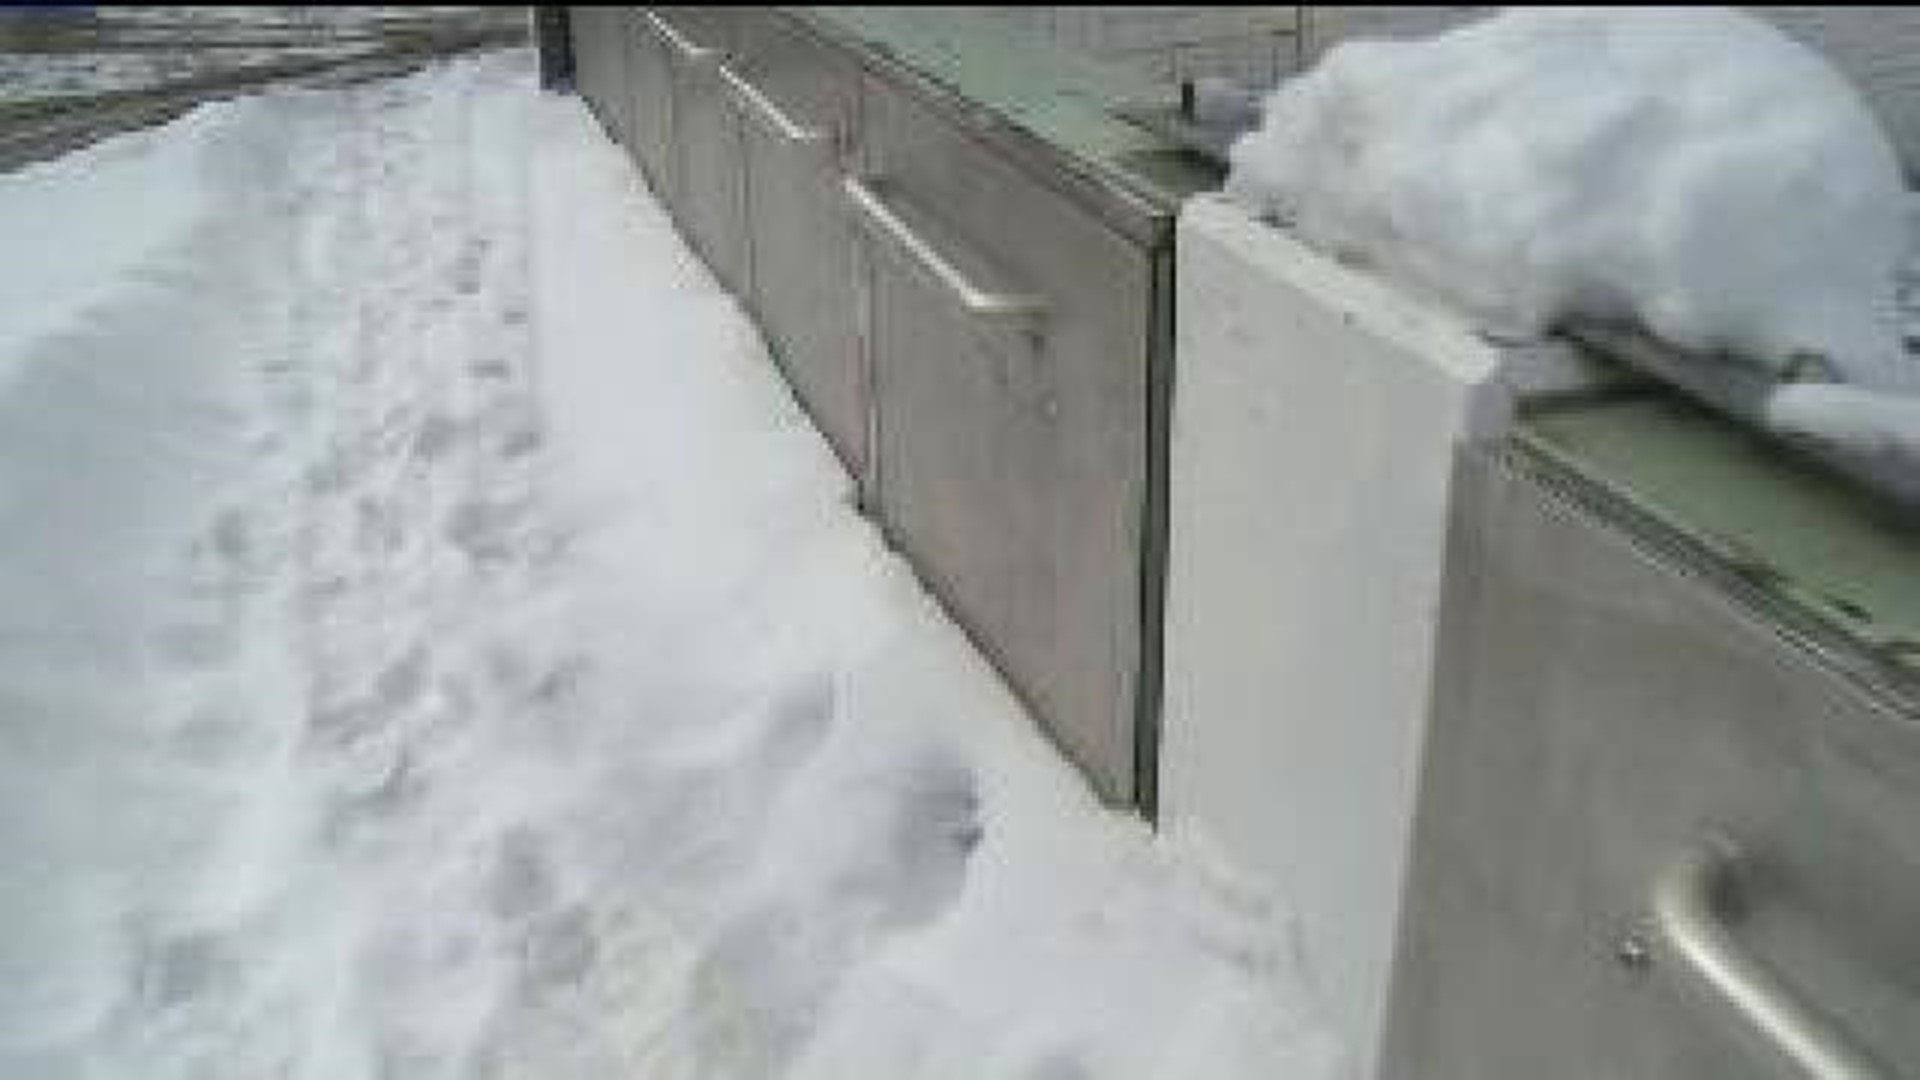 Snowbanks Along Floodgates to be Removed As Precaution